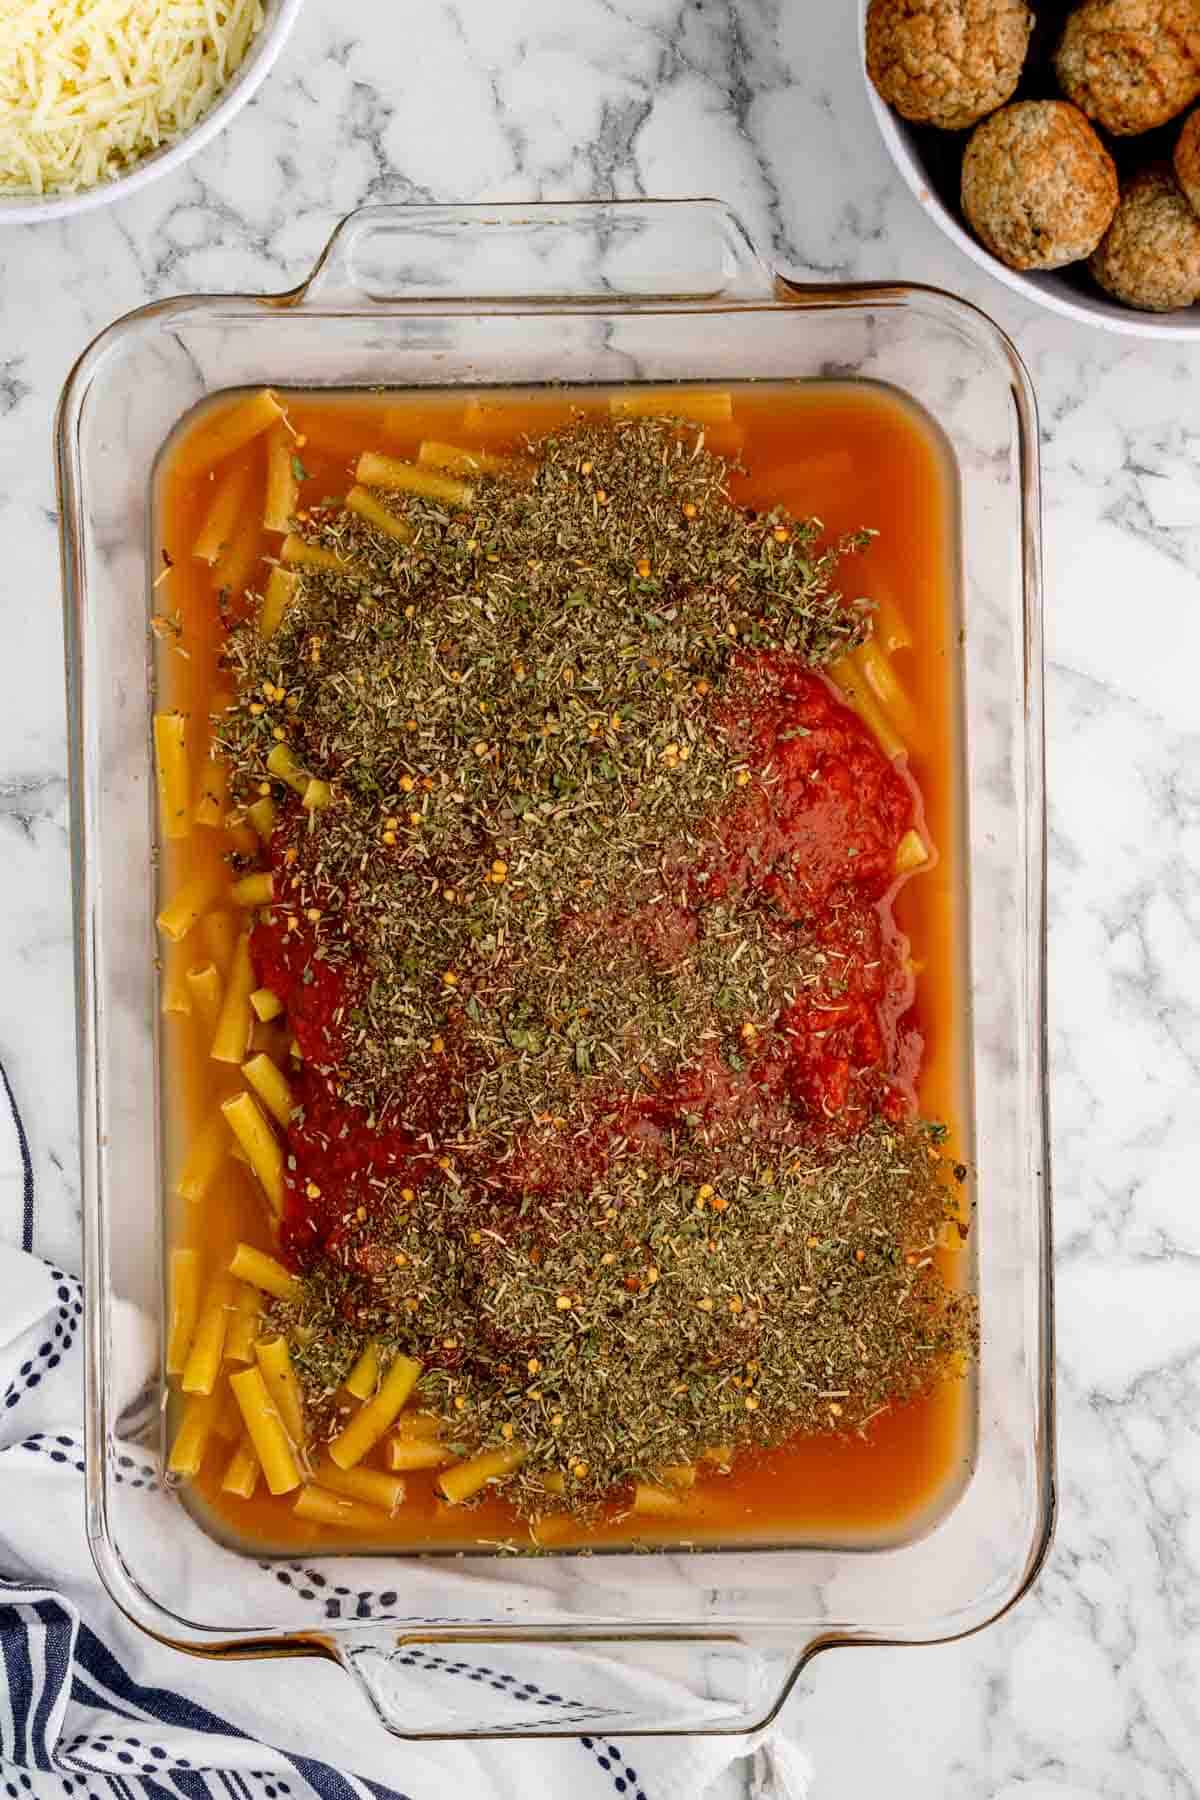 Italian seasoning, chicken stock and pasta sauce poured over uncooked ziti noodles in a baking dish